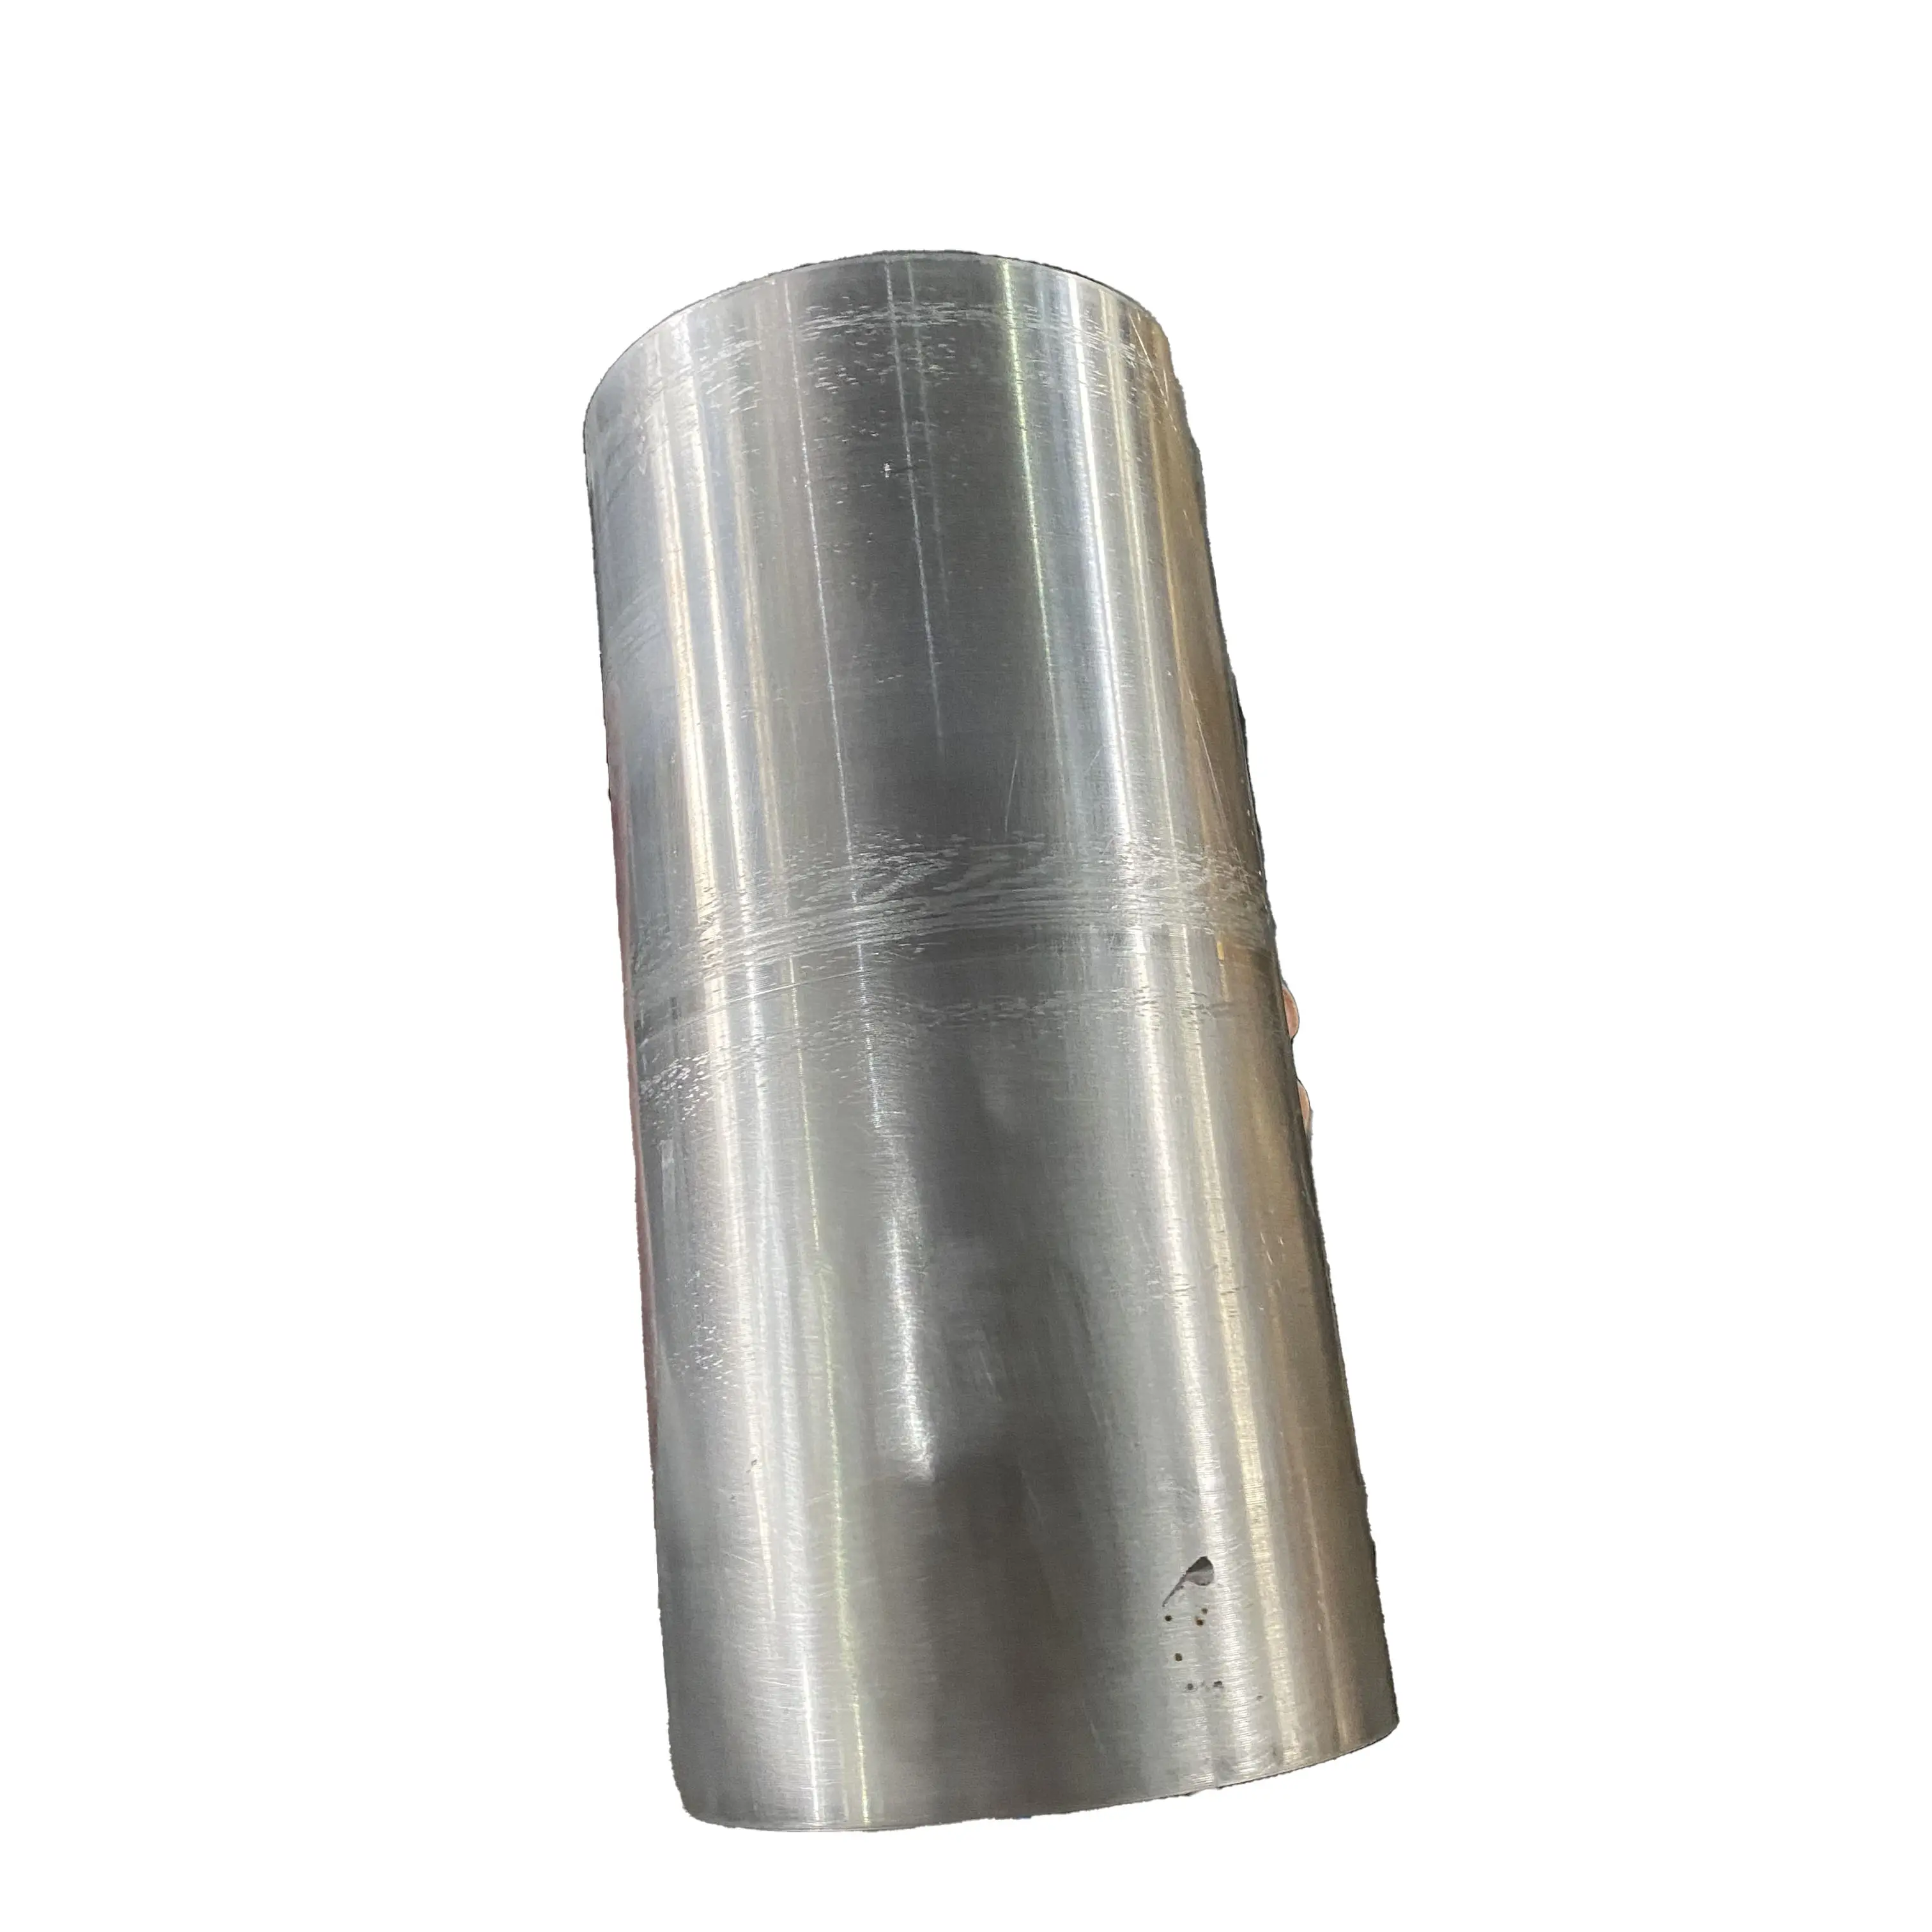 Customizable znic base alloy straight bushing Environmentally friendly lightweight wear-resistant material